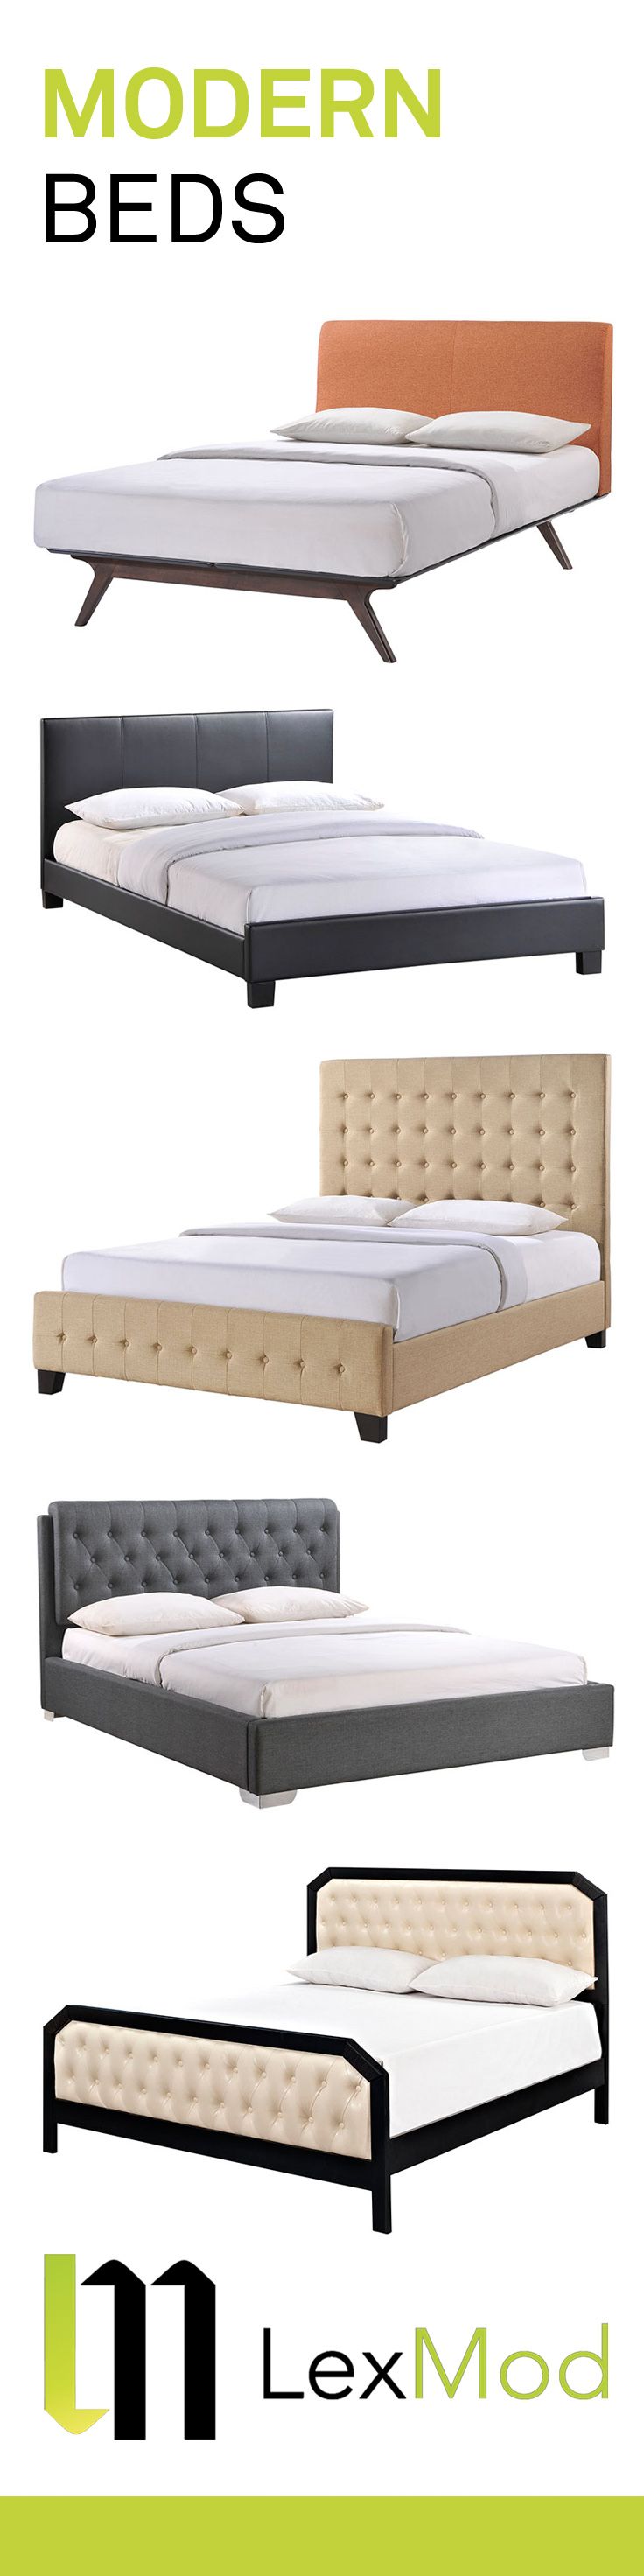 Beds direct- for all the bedroom solutions!